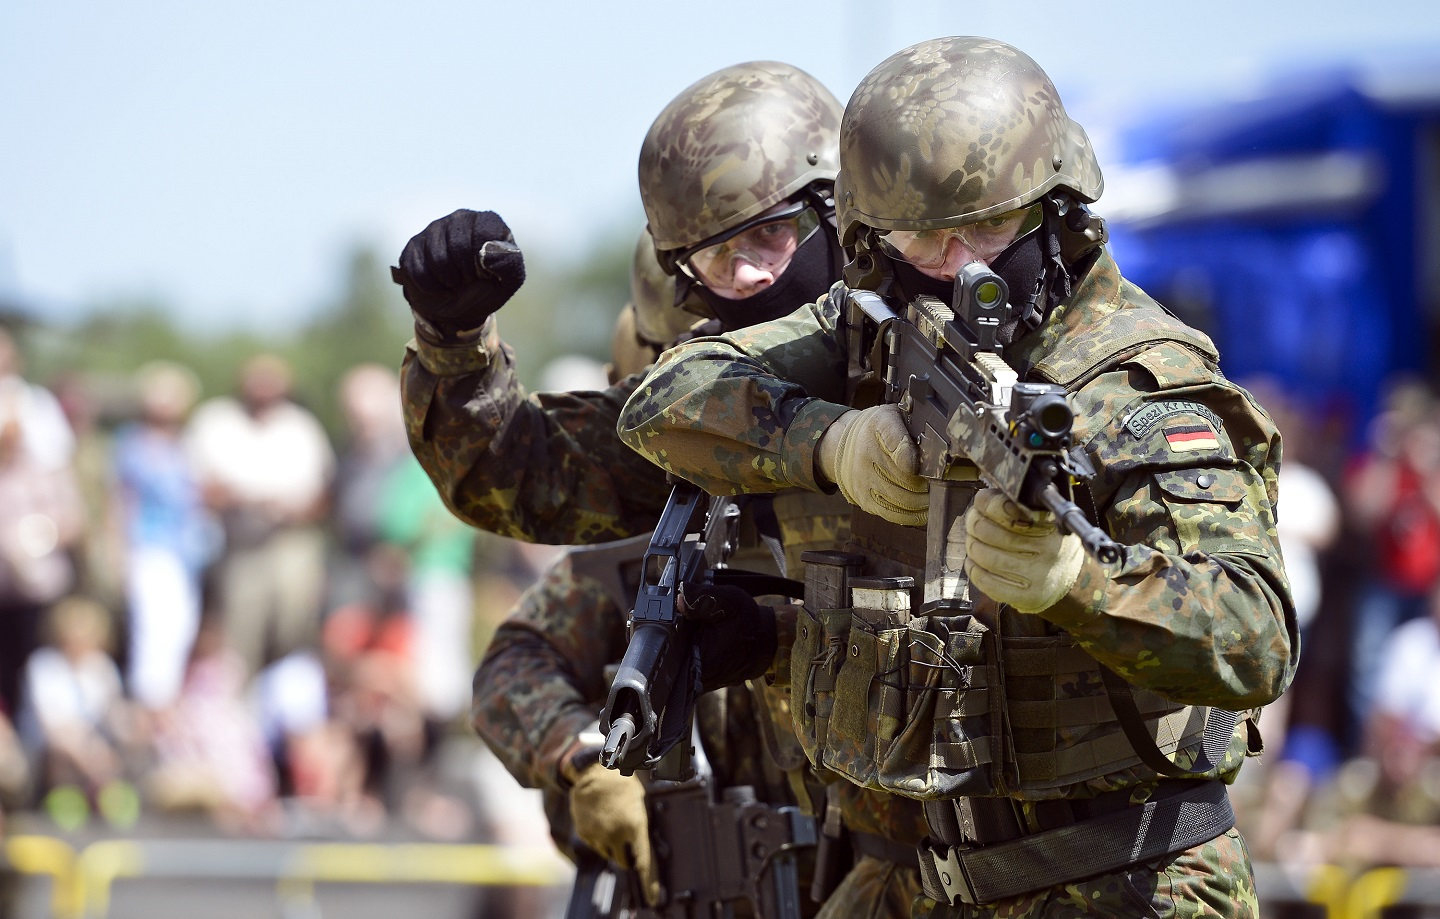 STADTALLENDORF, GERMANY - JUNE 12: German soldiers of the Division Schnelle Kraefte (DSK) show their skills at review Dutch and German troops at an event marking the integration of Dutch forces into the Division Schnelle Kraefte (DSK), or Rapid Forces Division, on June 12, 2014 in Stadtallendorf, Germany.